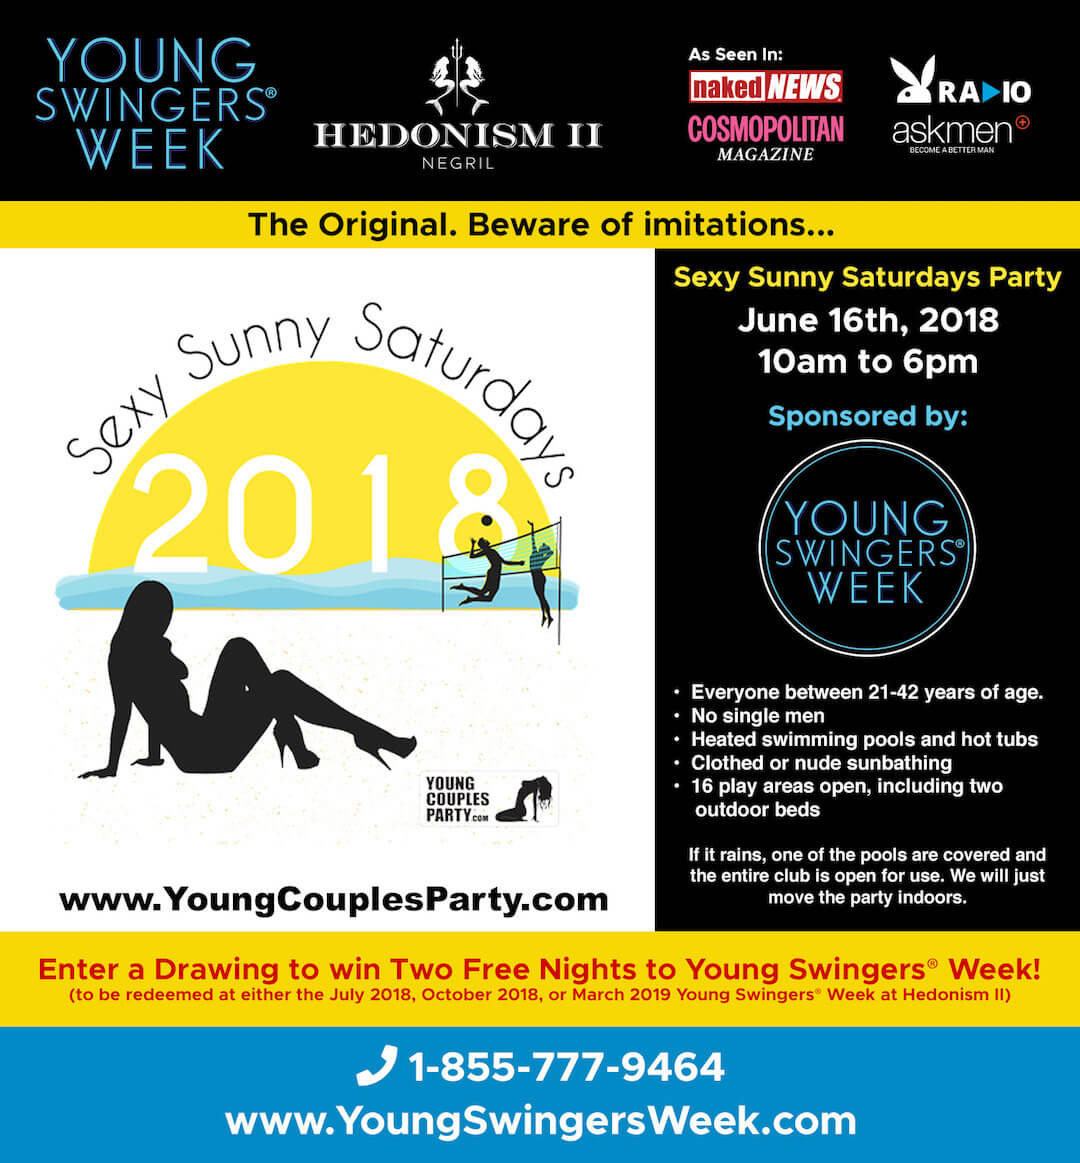 Young Swingers® Sponsored Party for YoungCouplesParty in Chicago, Illinois image pic